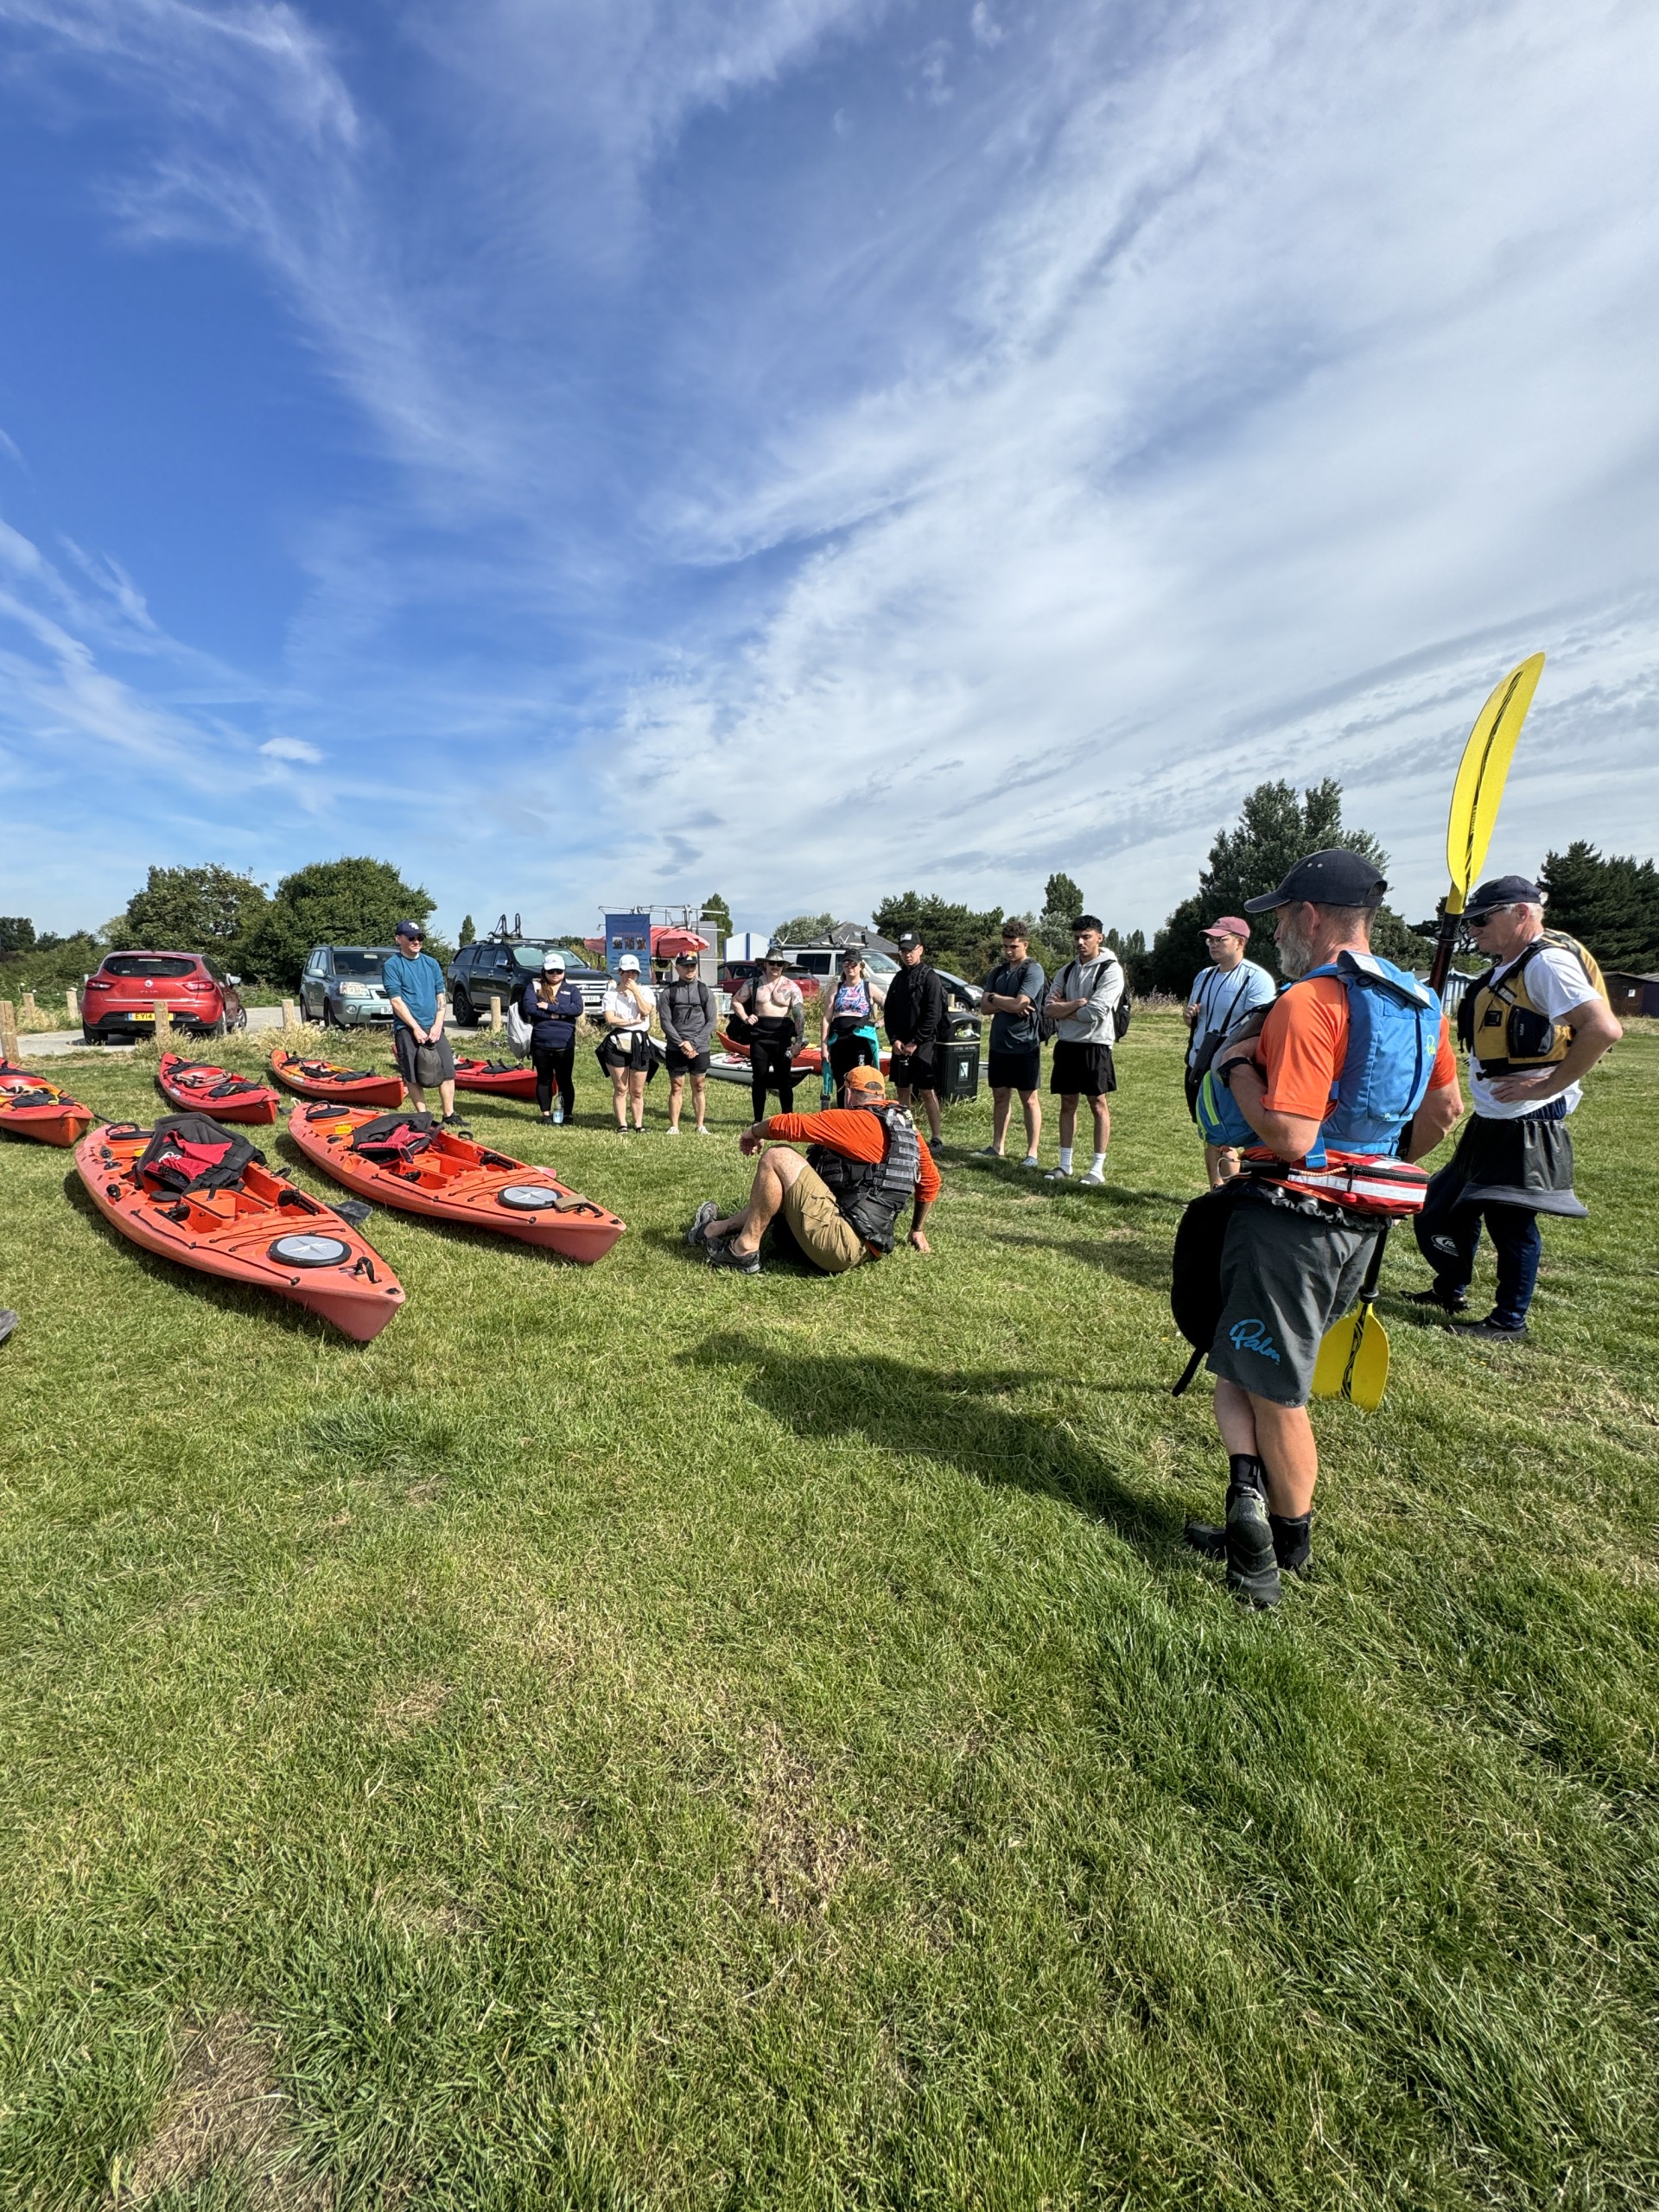 Safety briefing with NOMAD Sea Kayaking.